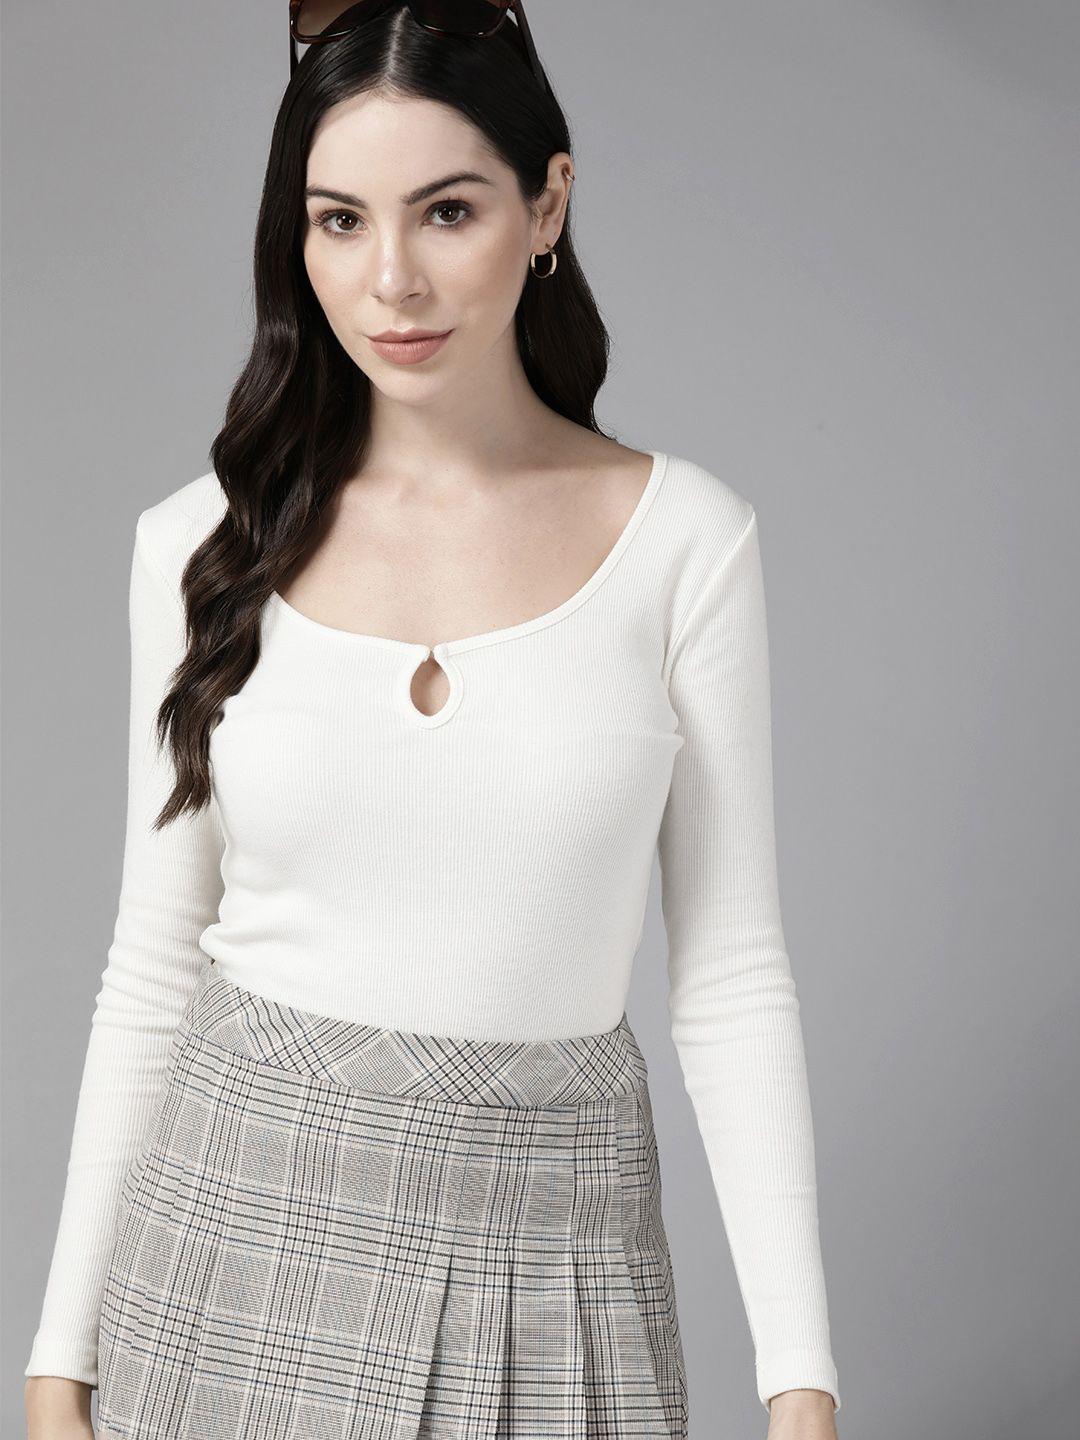 the roadster lifestyle co.ribbed keyhole neck top